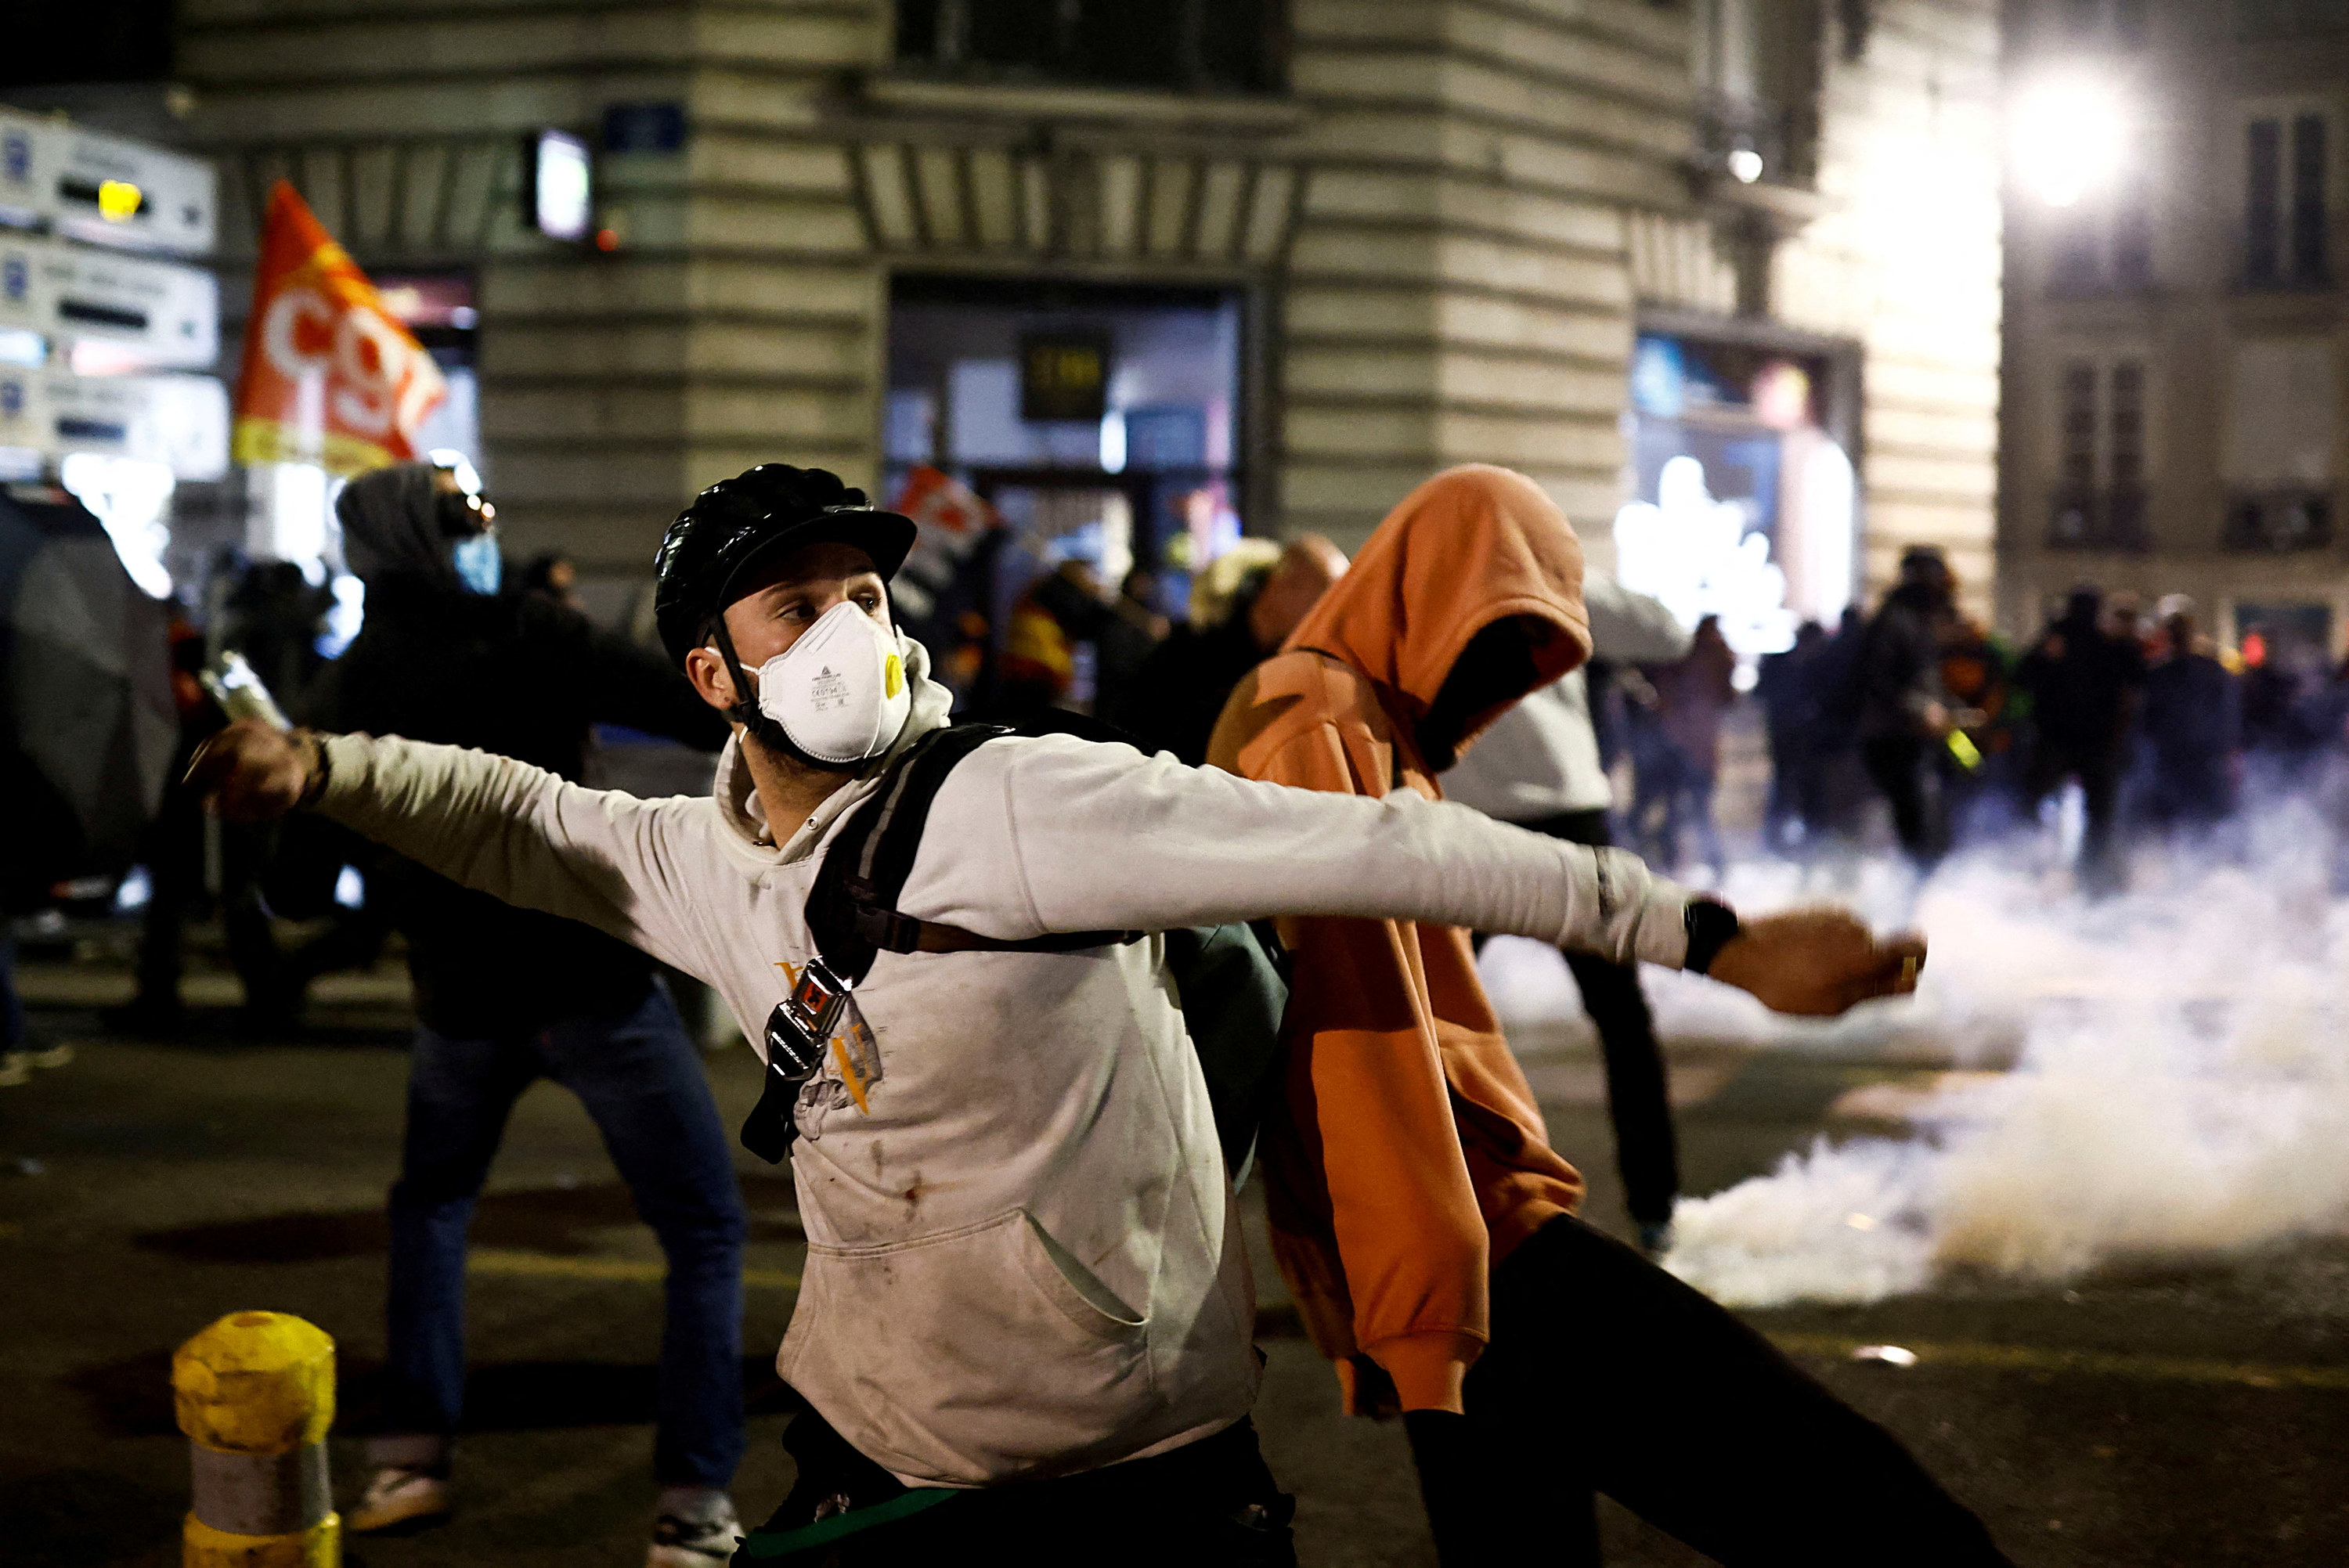 a protester wearing a bike helment and a mask throws projectiles at the police